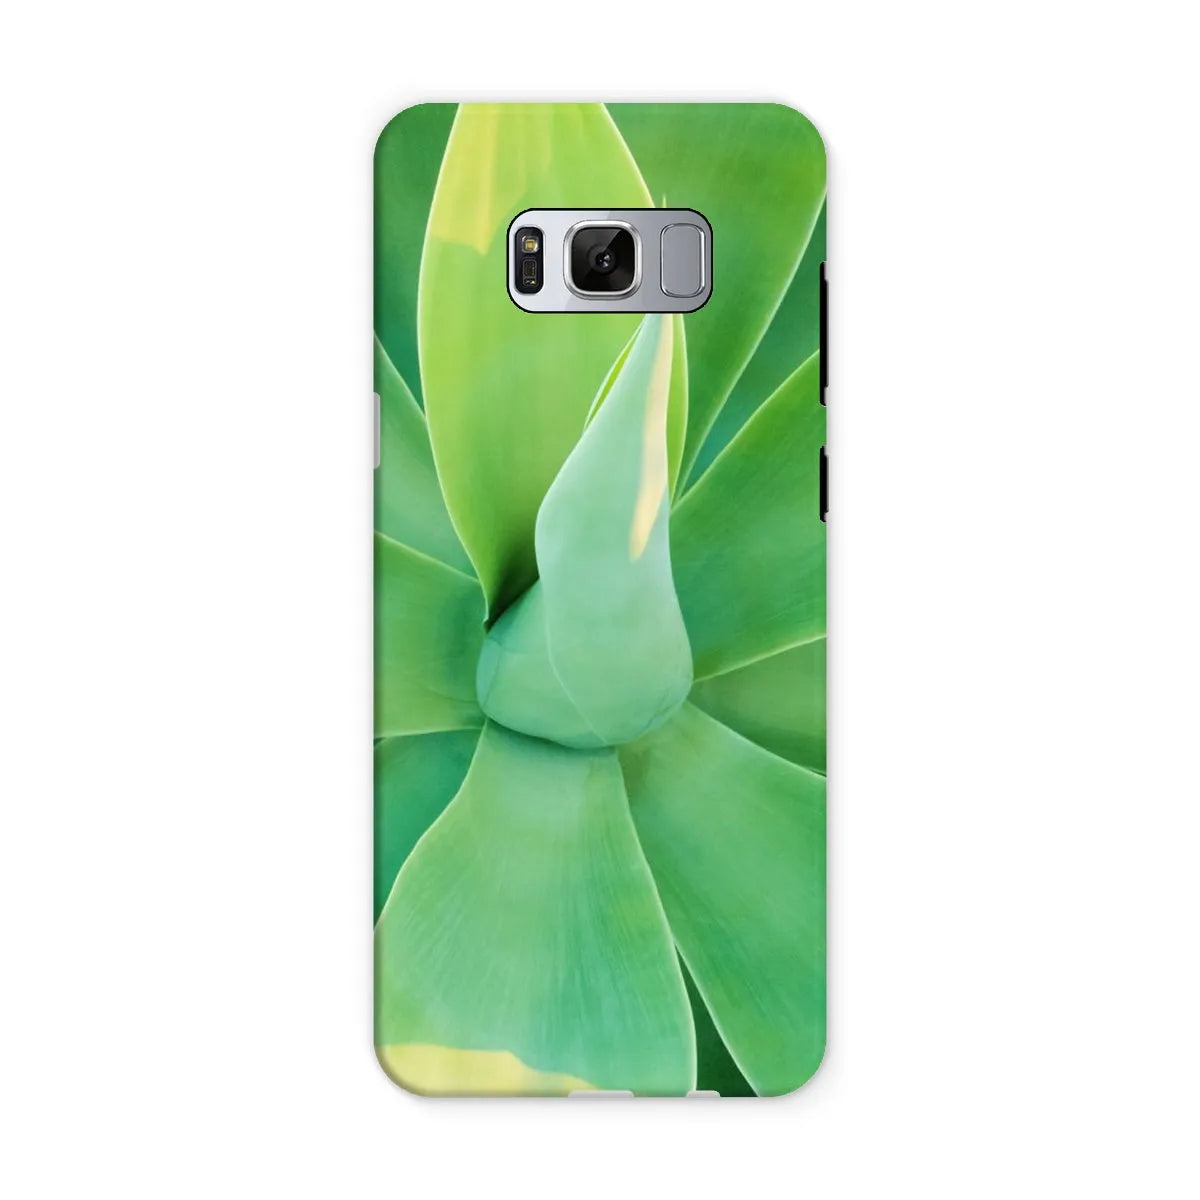 In Bloom Too Tough Phone Case - Samsung Galaxy S8 / Matte - Mobile Phone Cases - Aesthetic Art